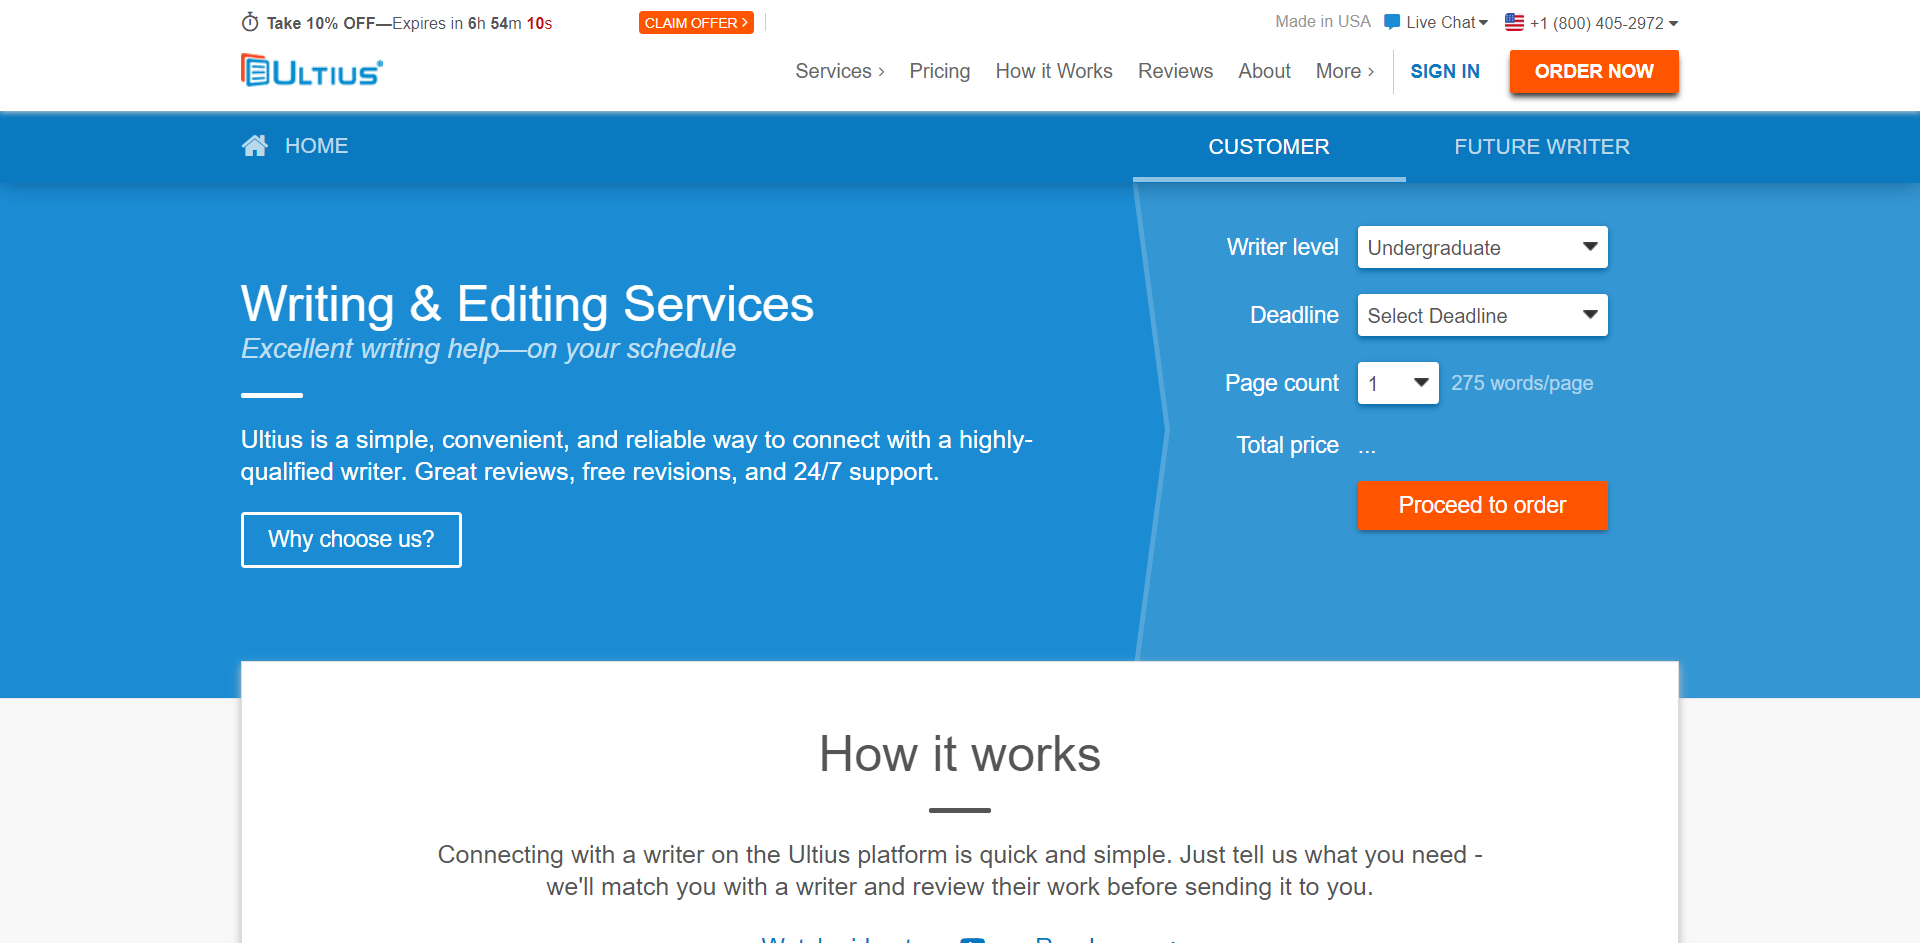 ultius writing service review